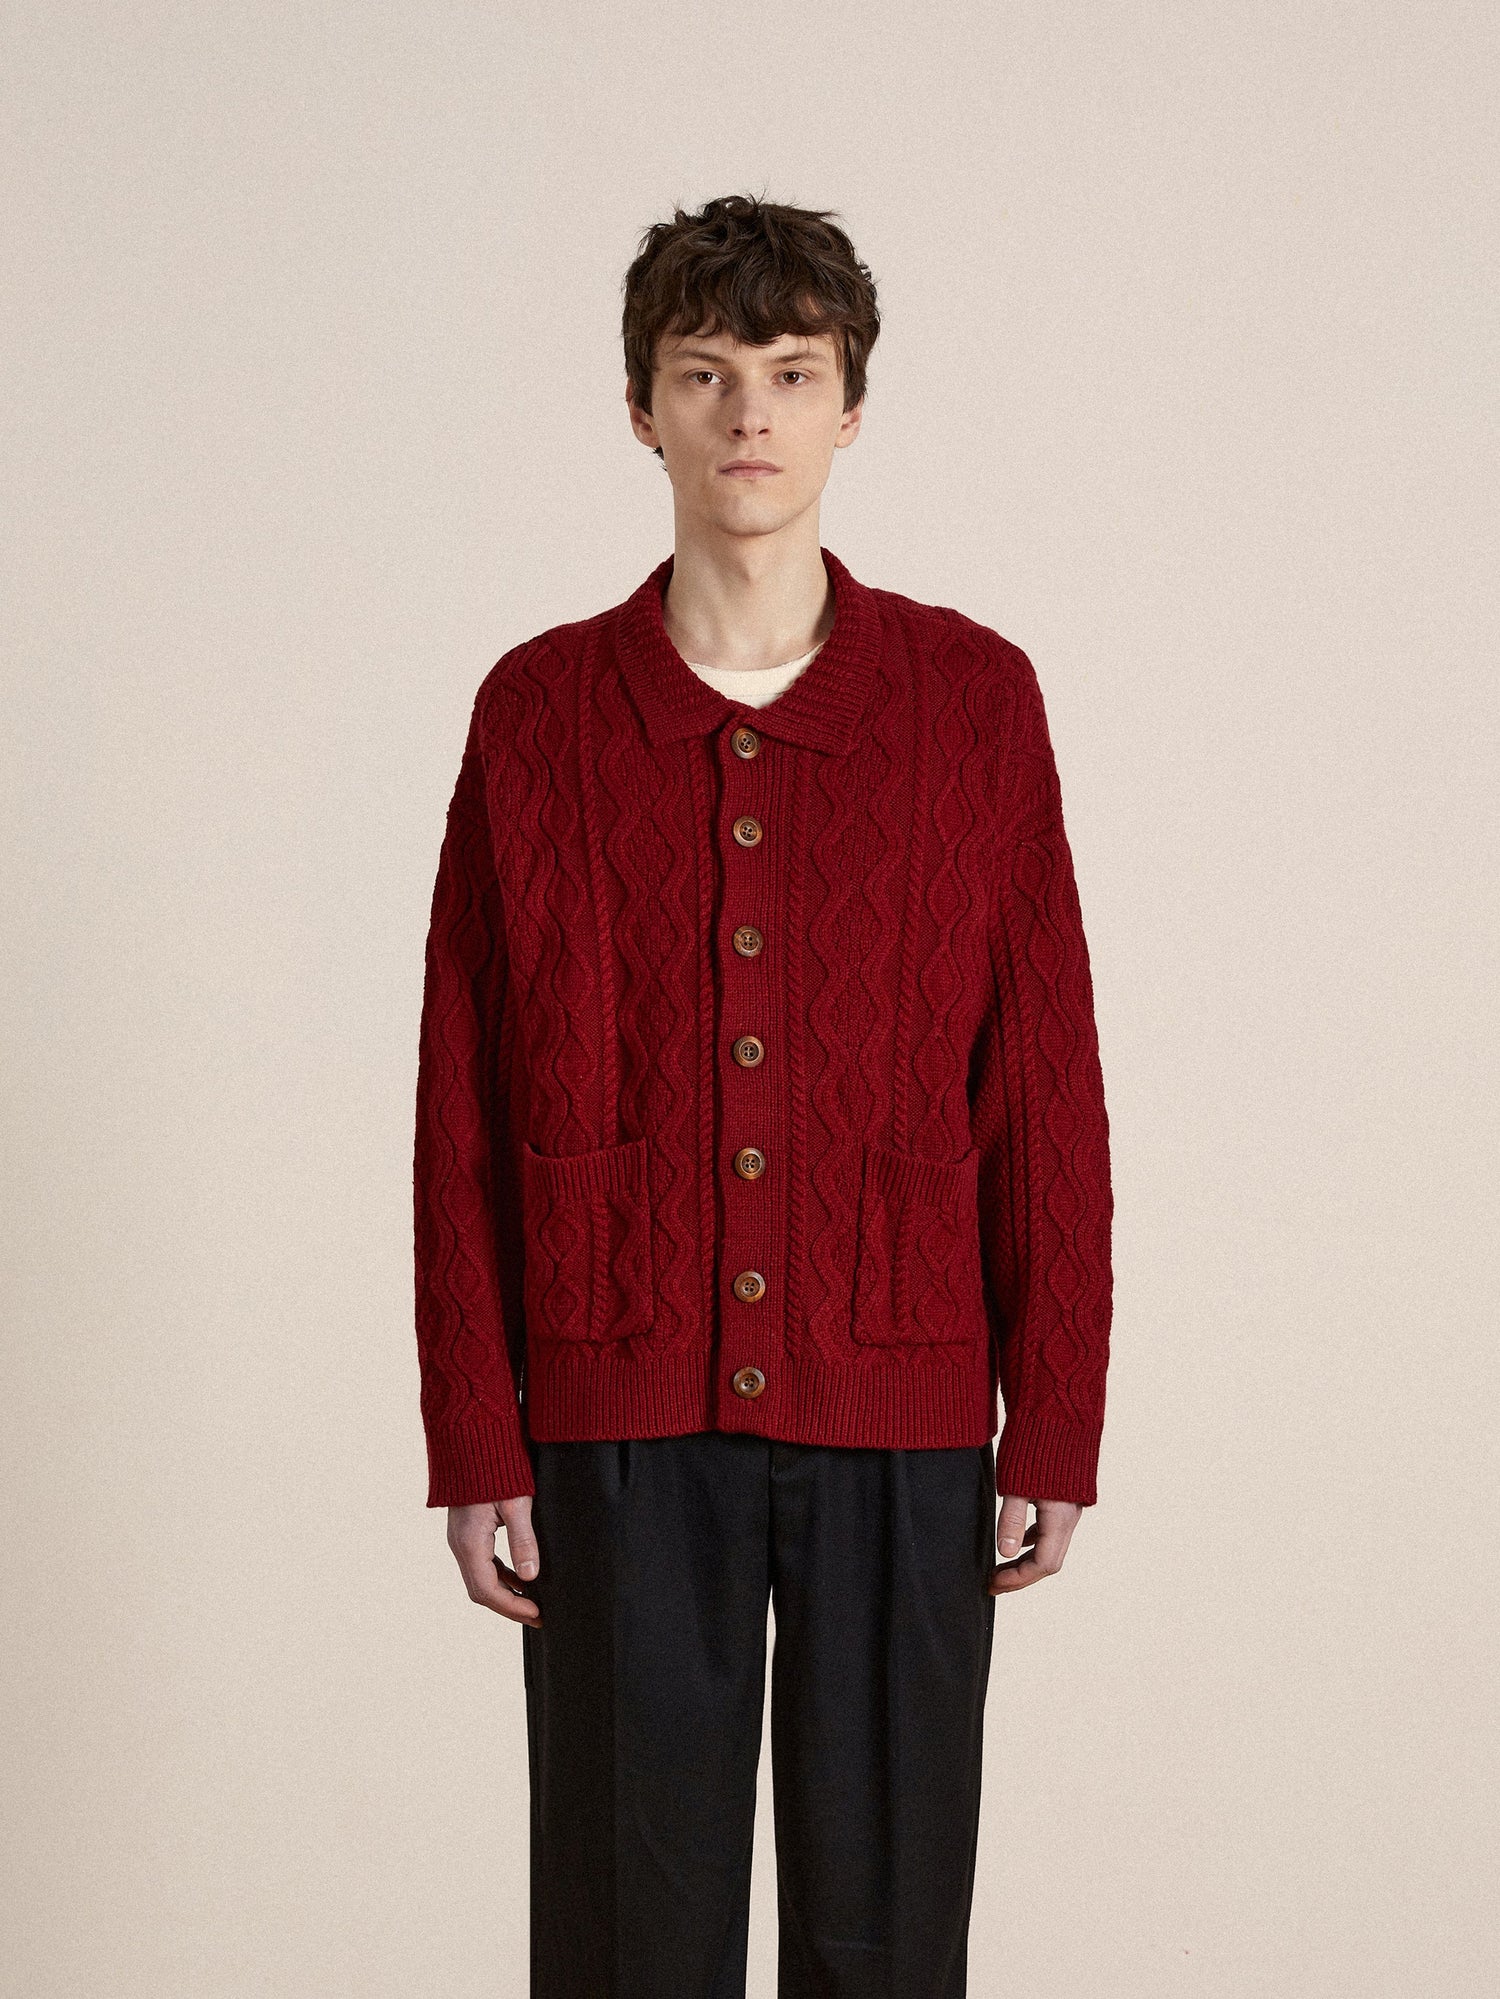 A man wearing a red Parsidan Cable Knit Cardigan and black pants by Found.